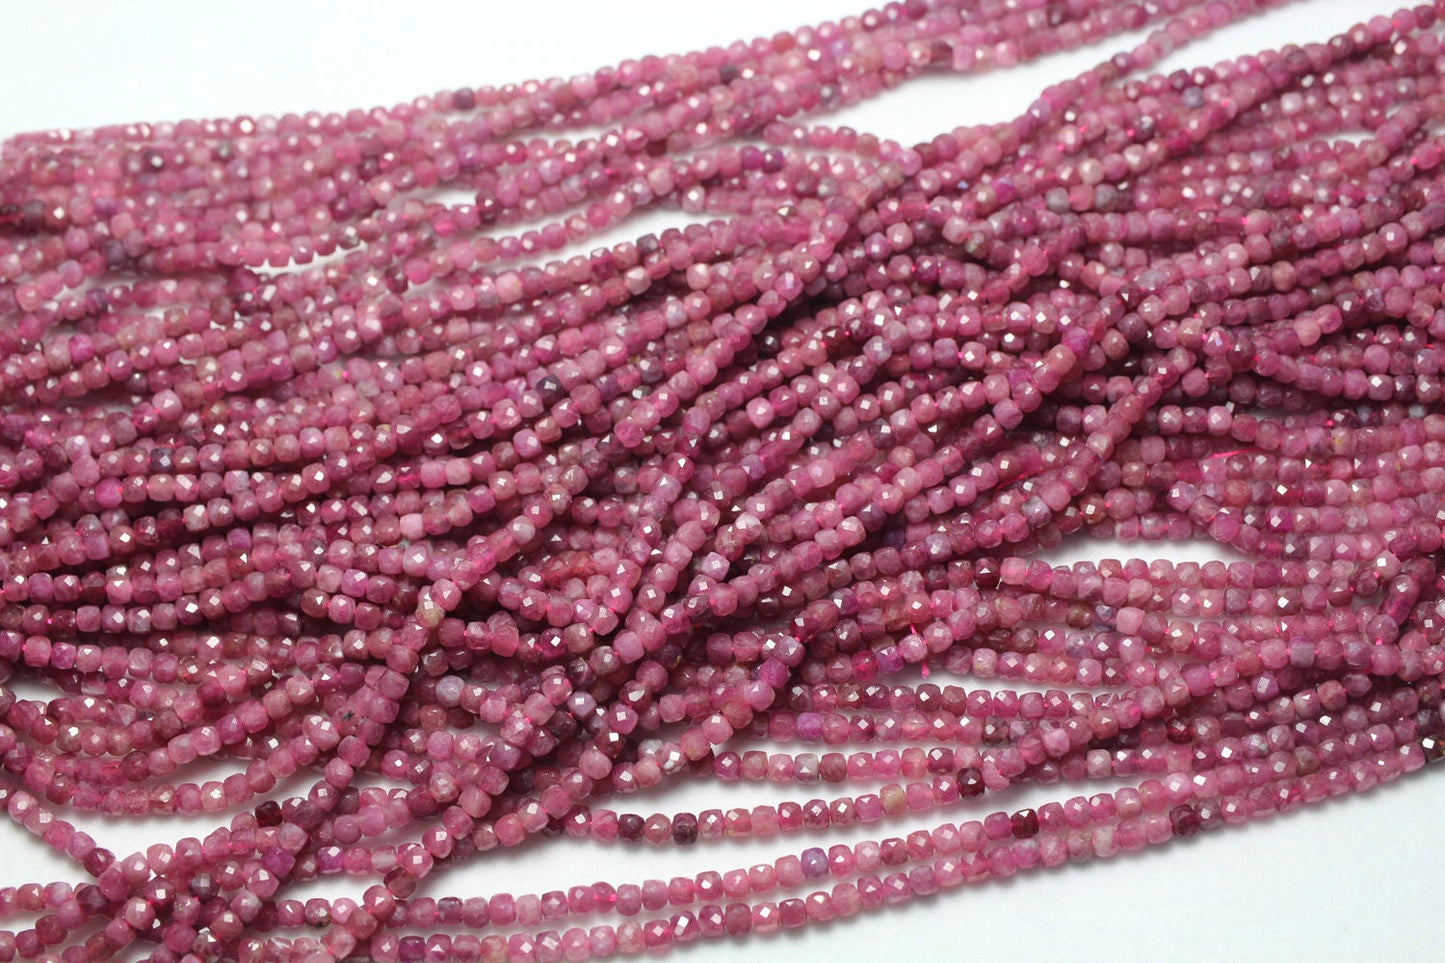 Pink Tourmaline Cube Faceted Beads Natural Gemstone Beads 4-5mm 15''